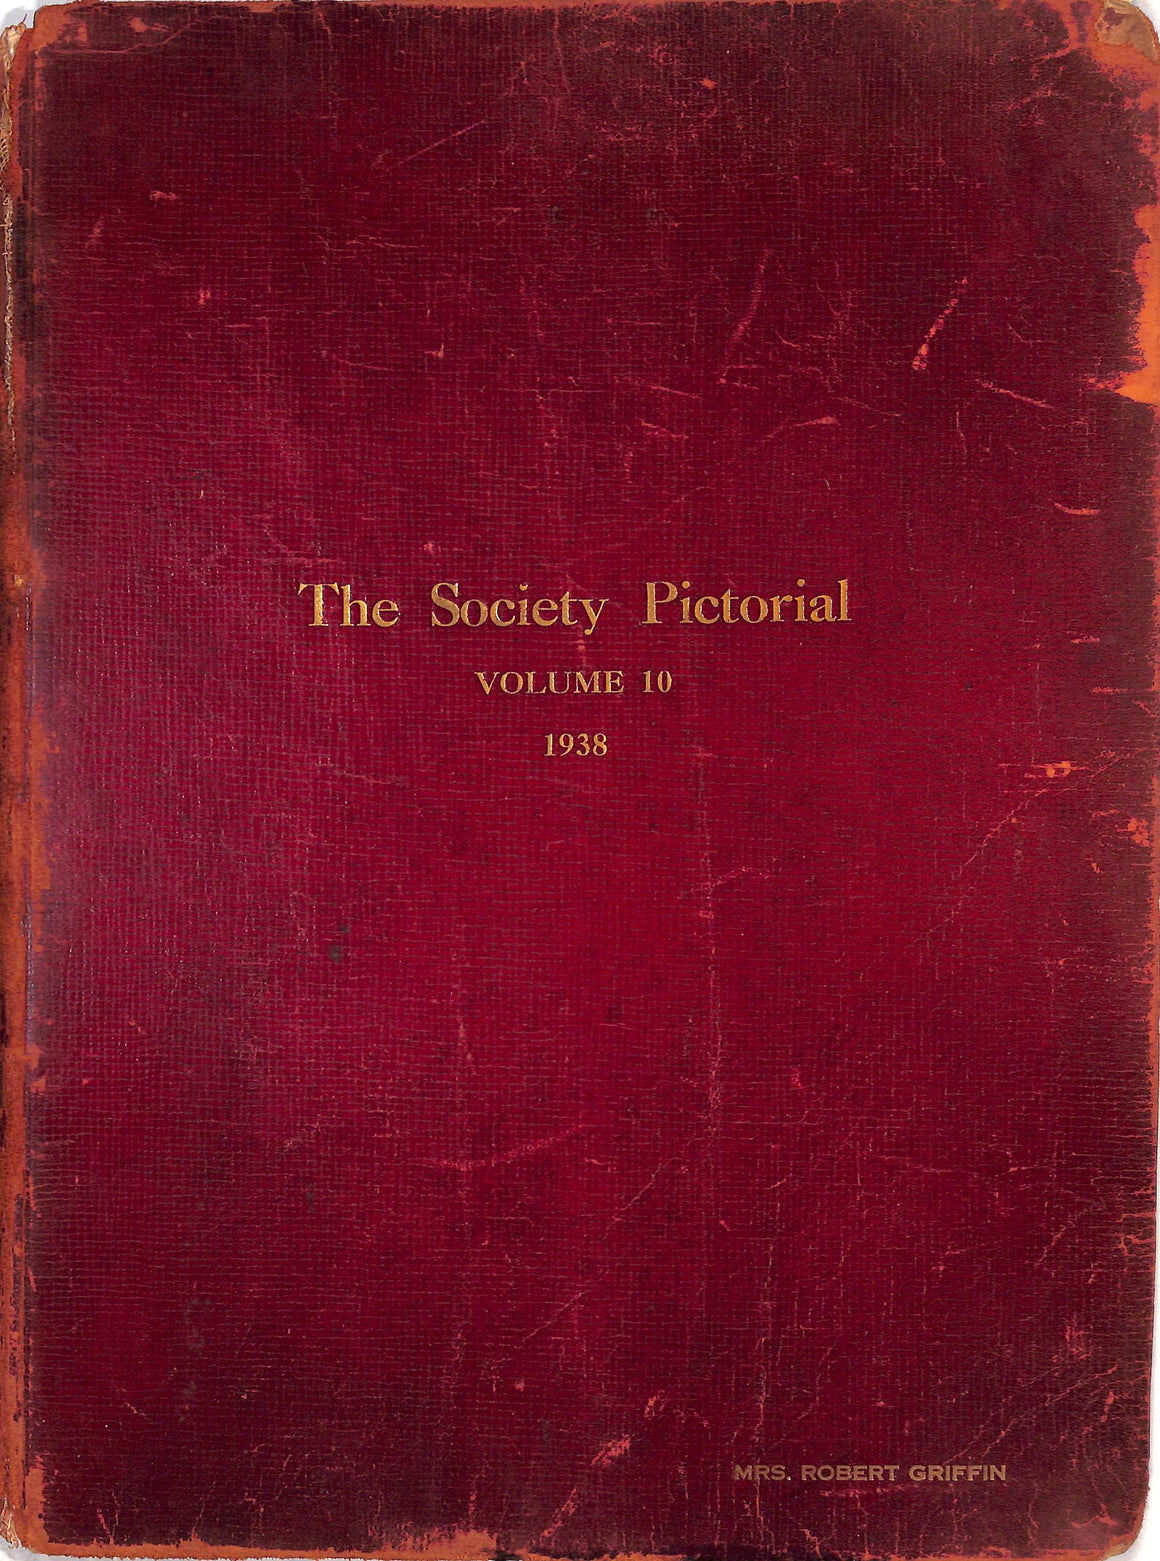 "The Society Pictorial Bound Set Of 12 Magazine Issues Volume 10 1938" 1938